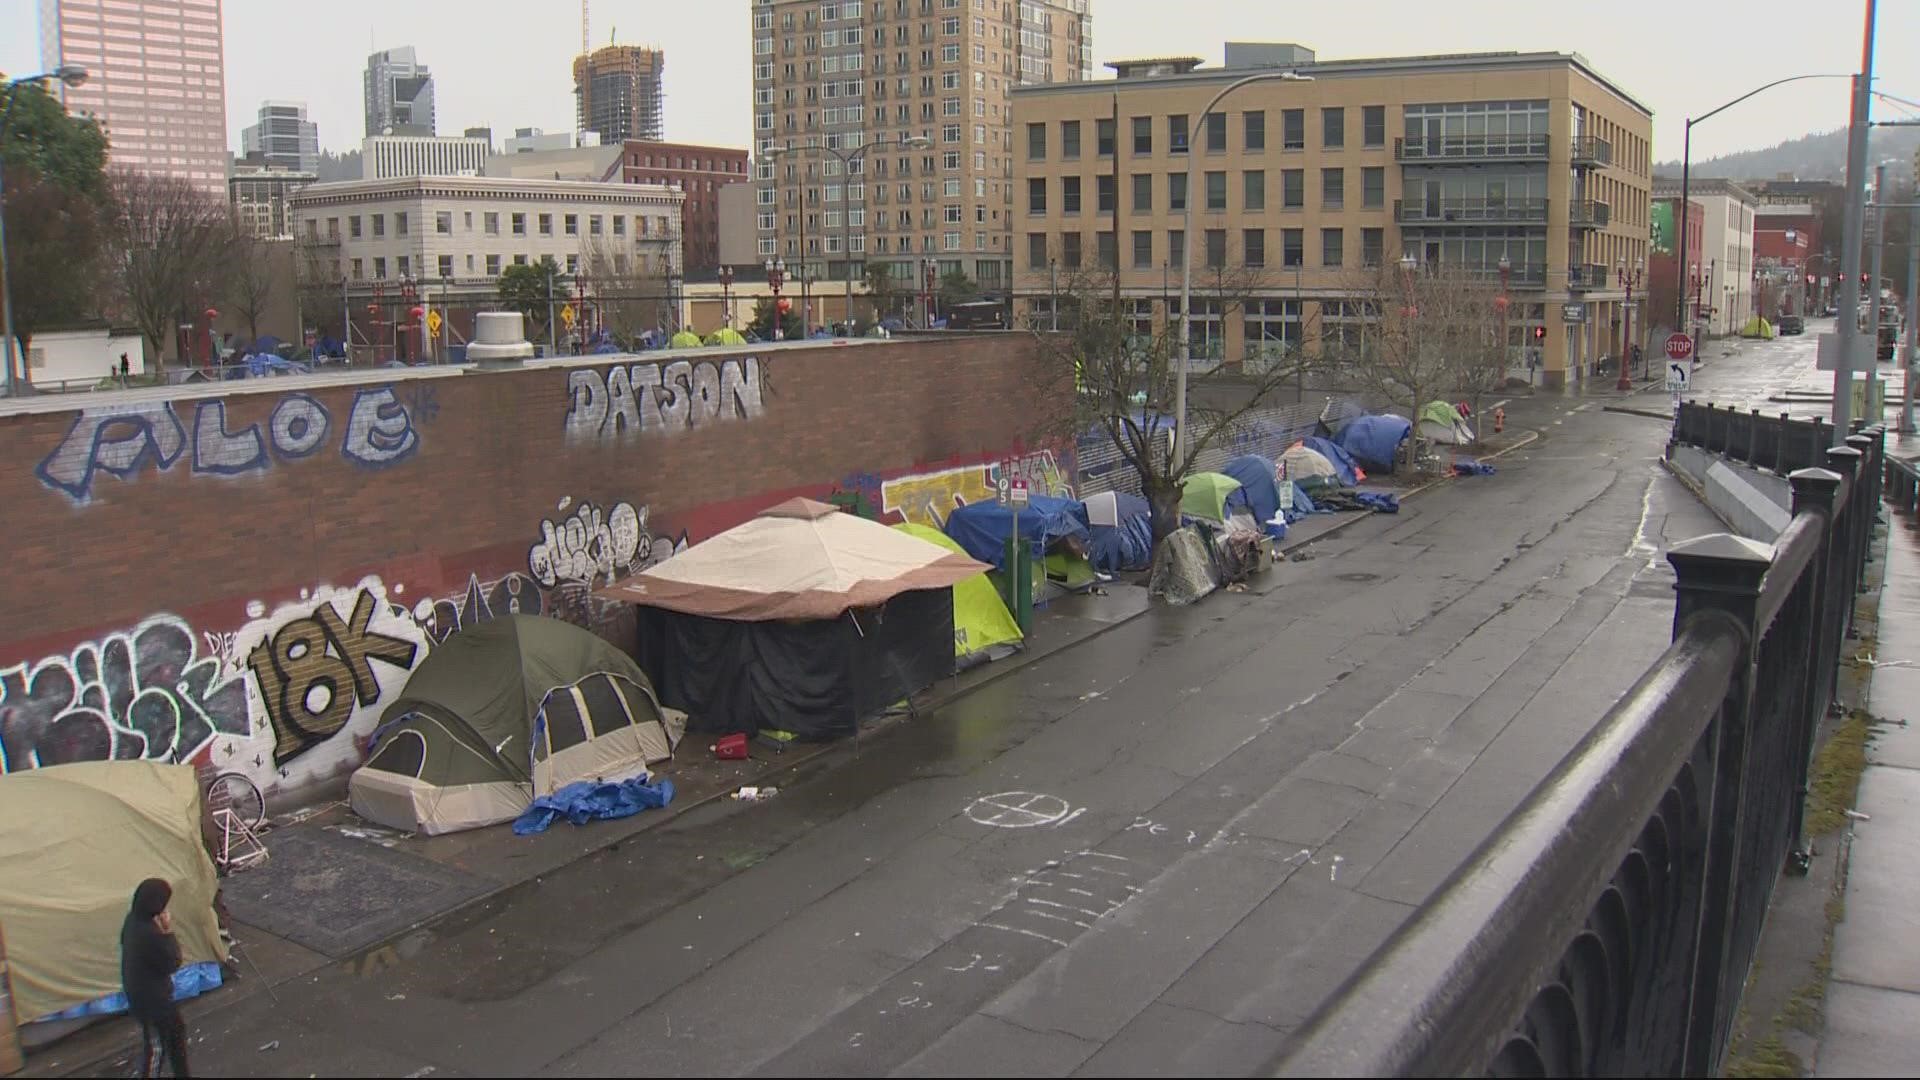 The mayor wants three 500-person homeless "campuses" with each divided into four 125-person camps.